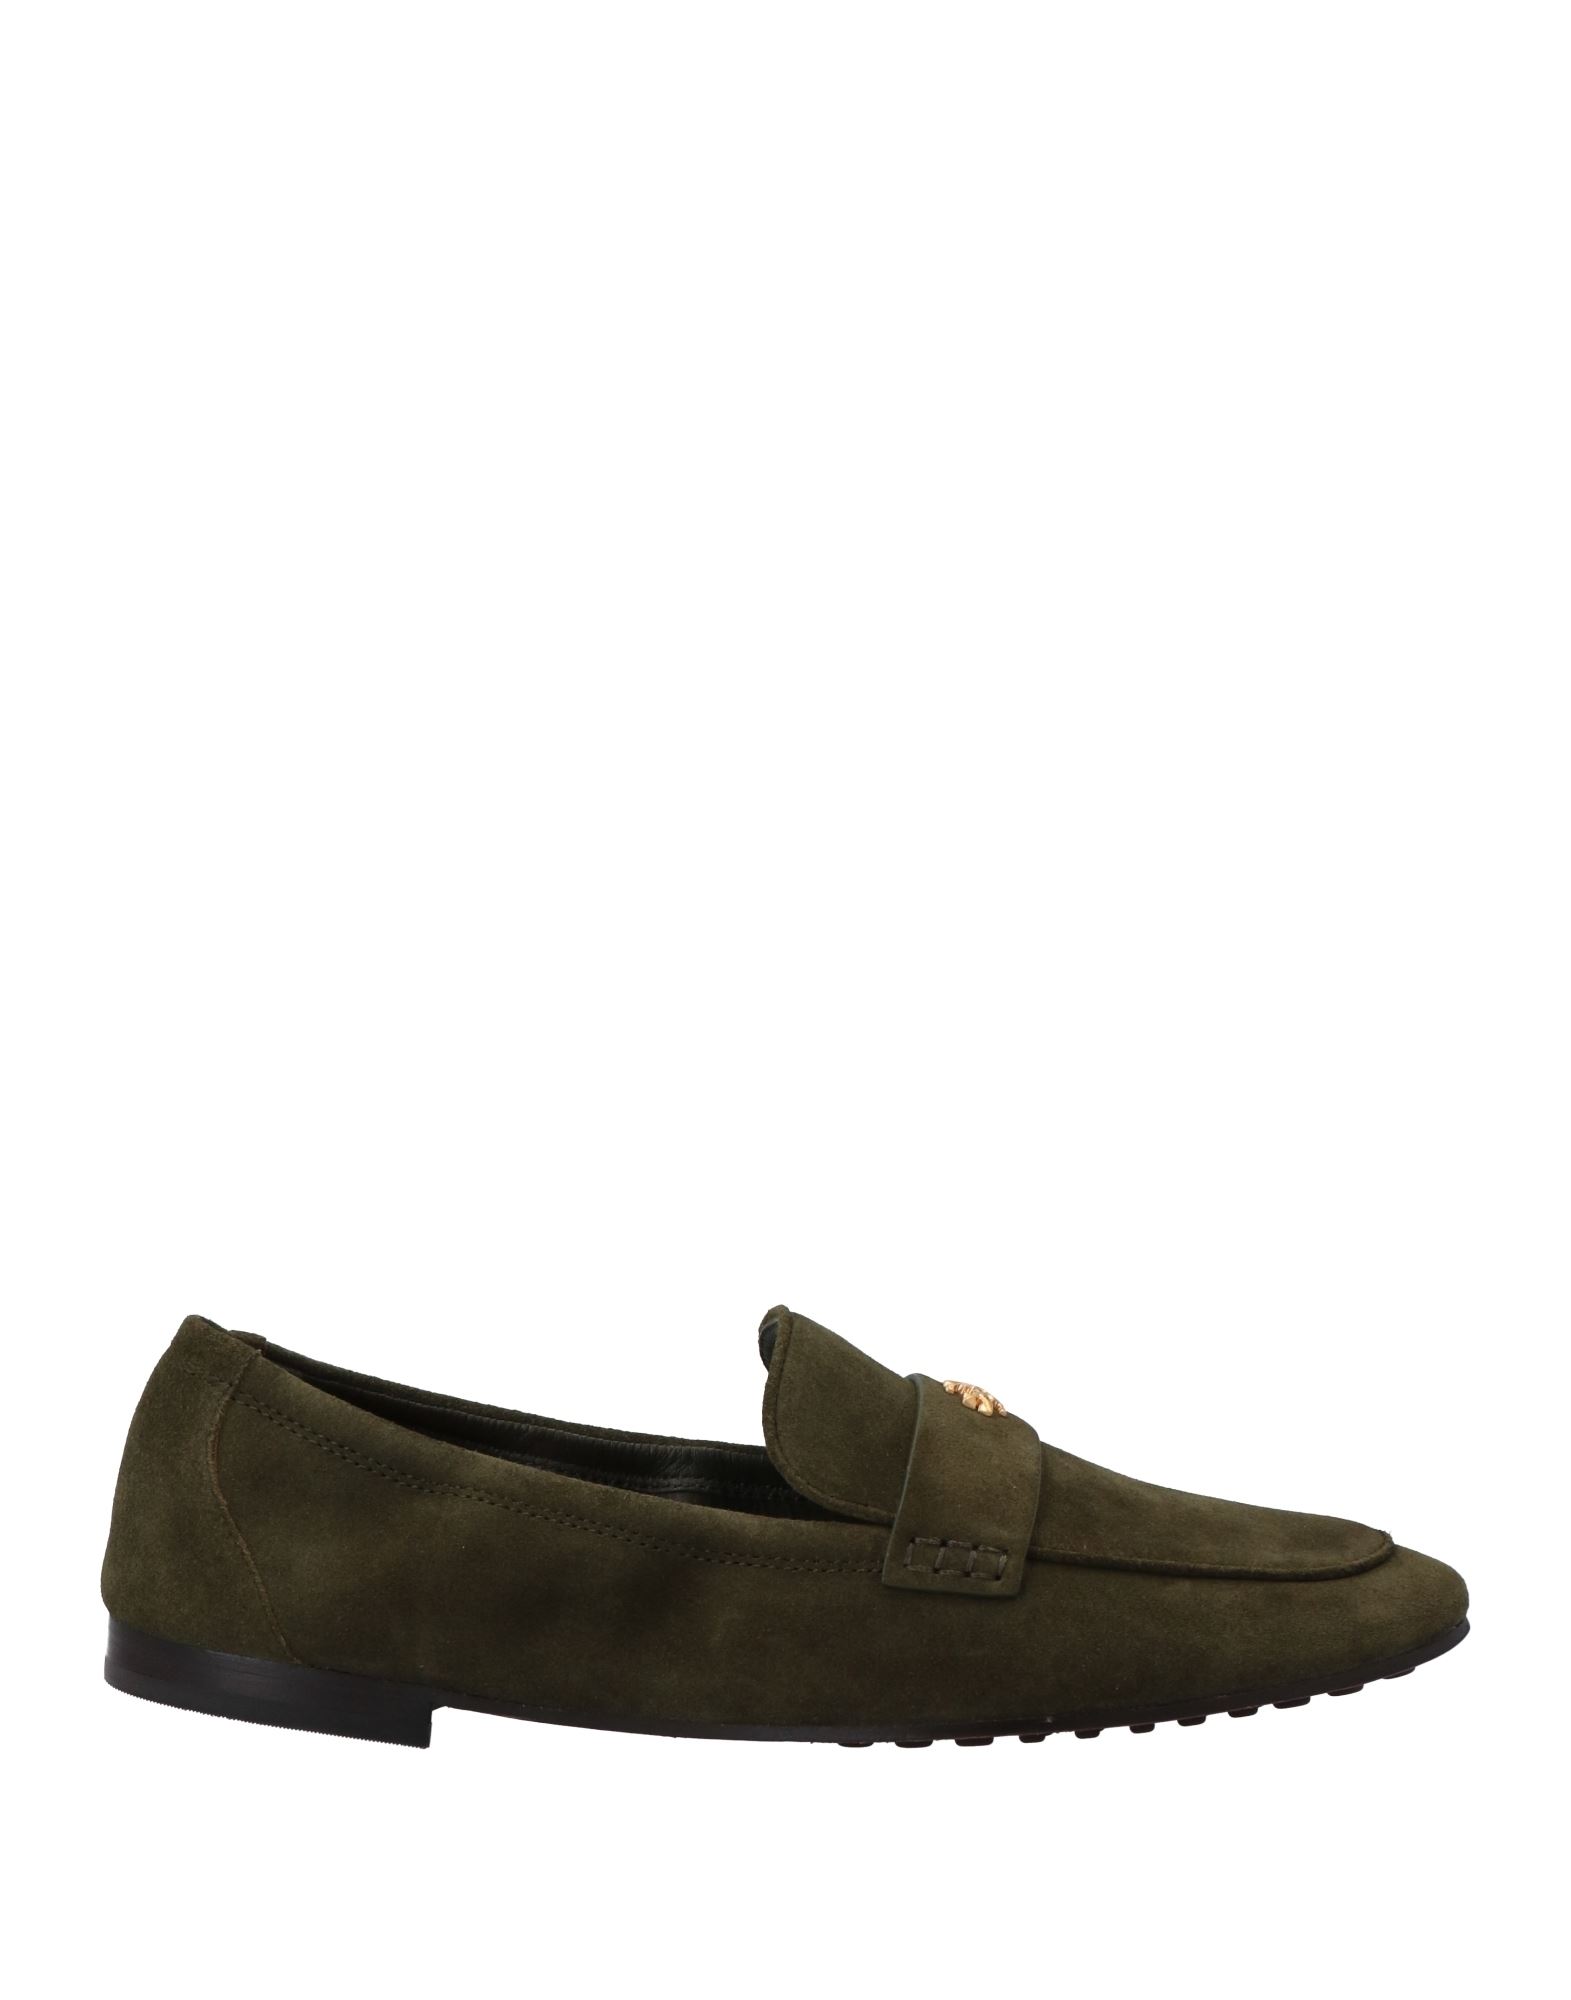 Tory Burch Loafers In Military Green